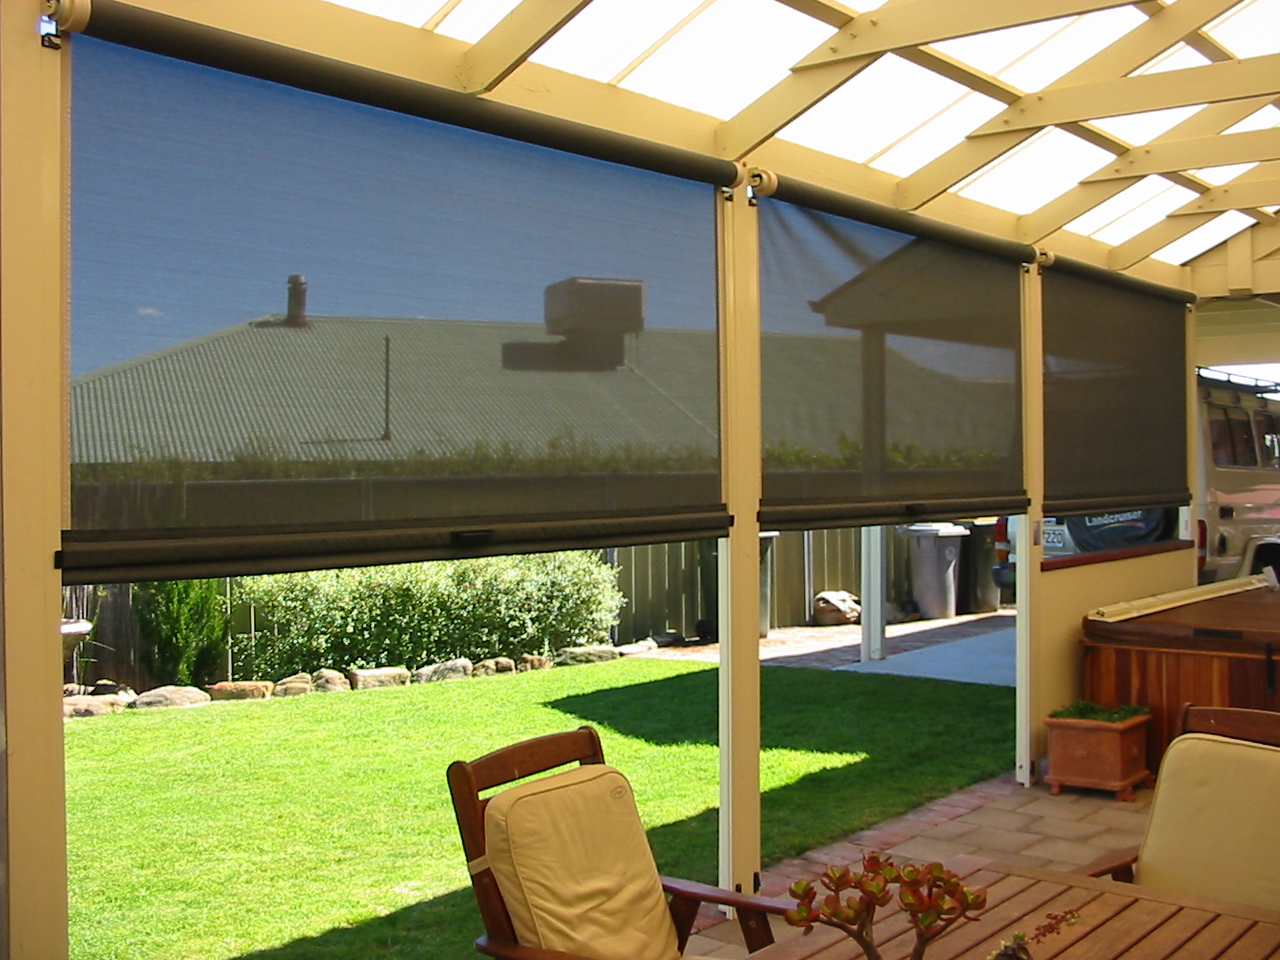 Top 5 Reasons For Investing In Quality Outdoor Blinds